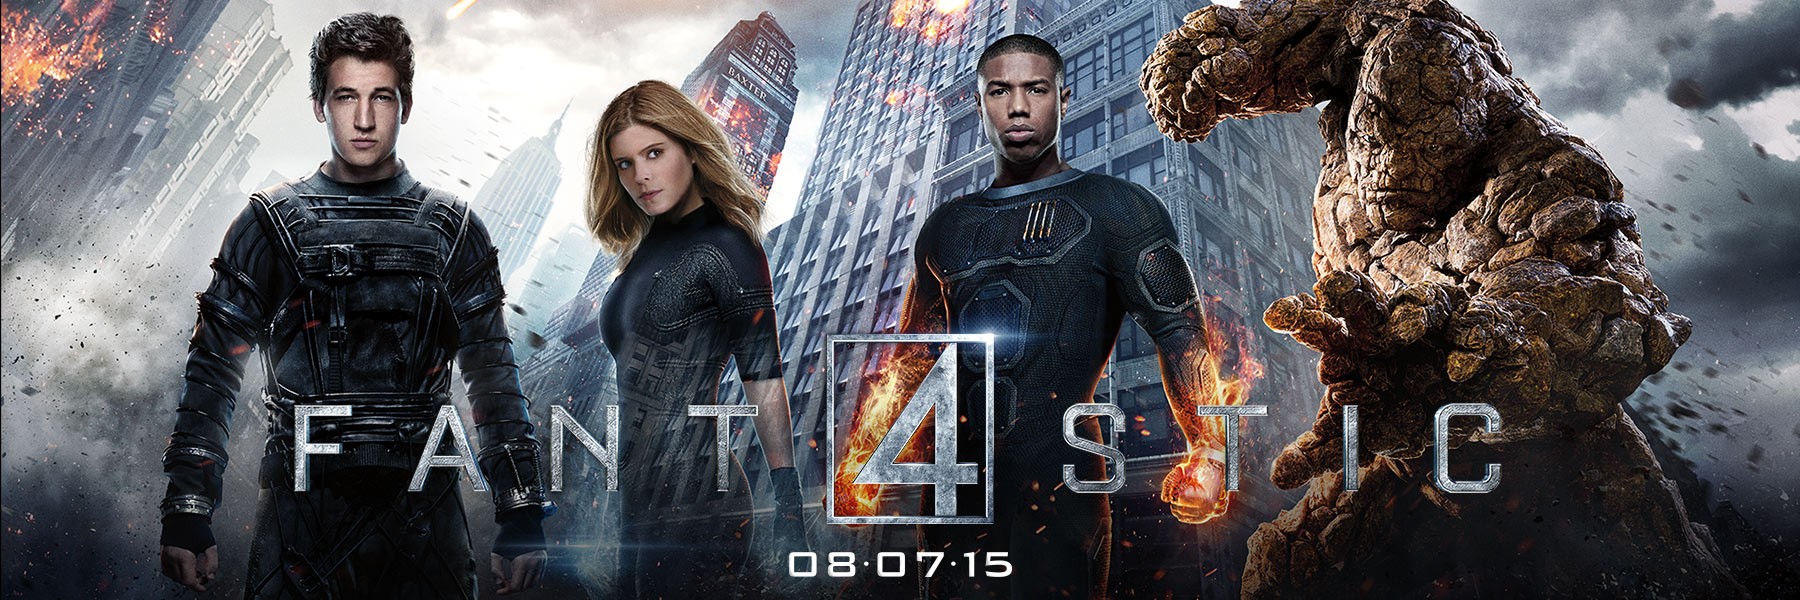 fantastic-four-movie-is-an-american-superhero-action-thriller